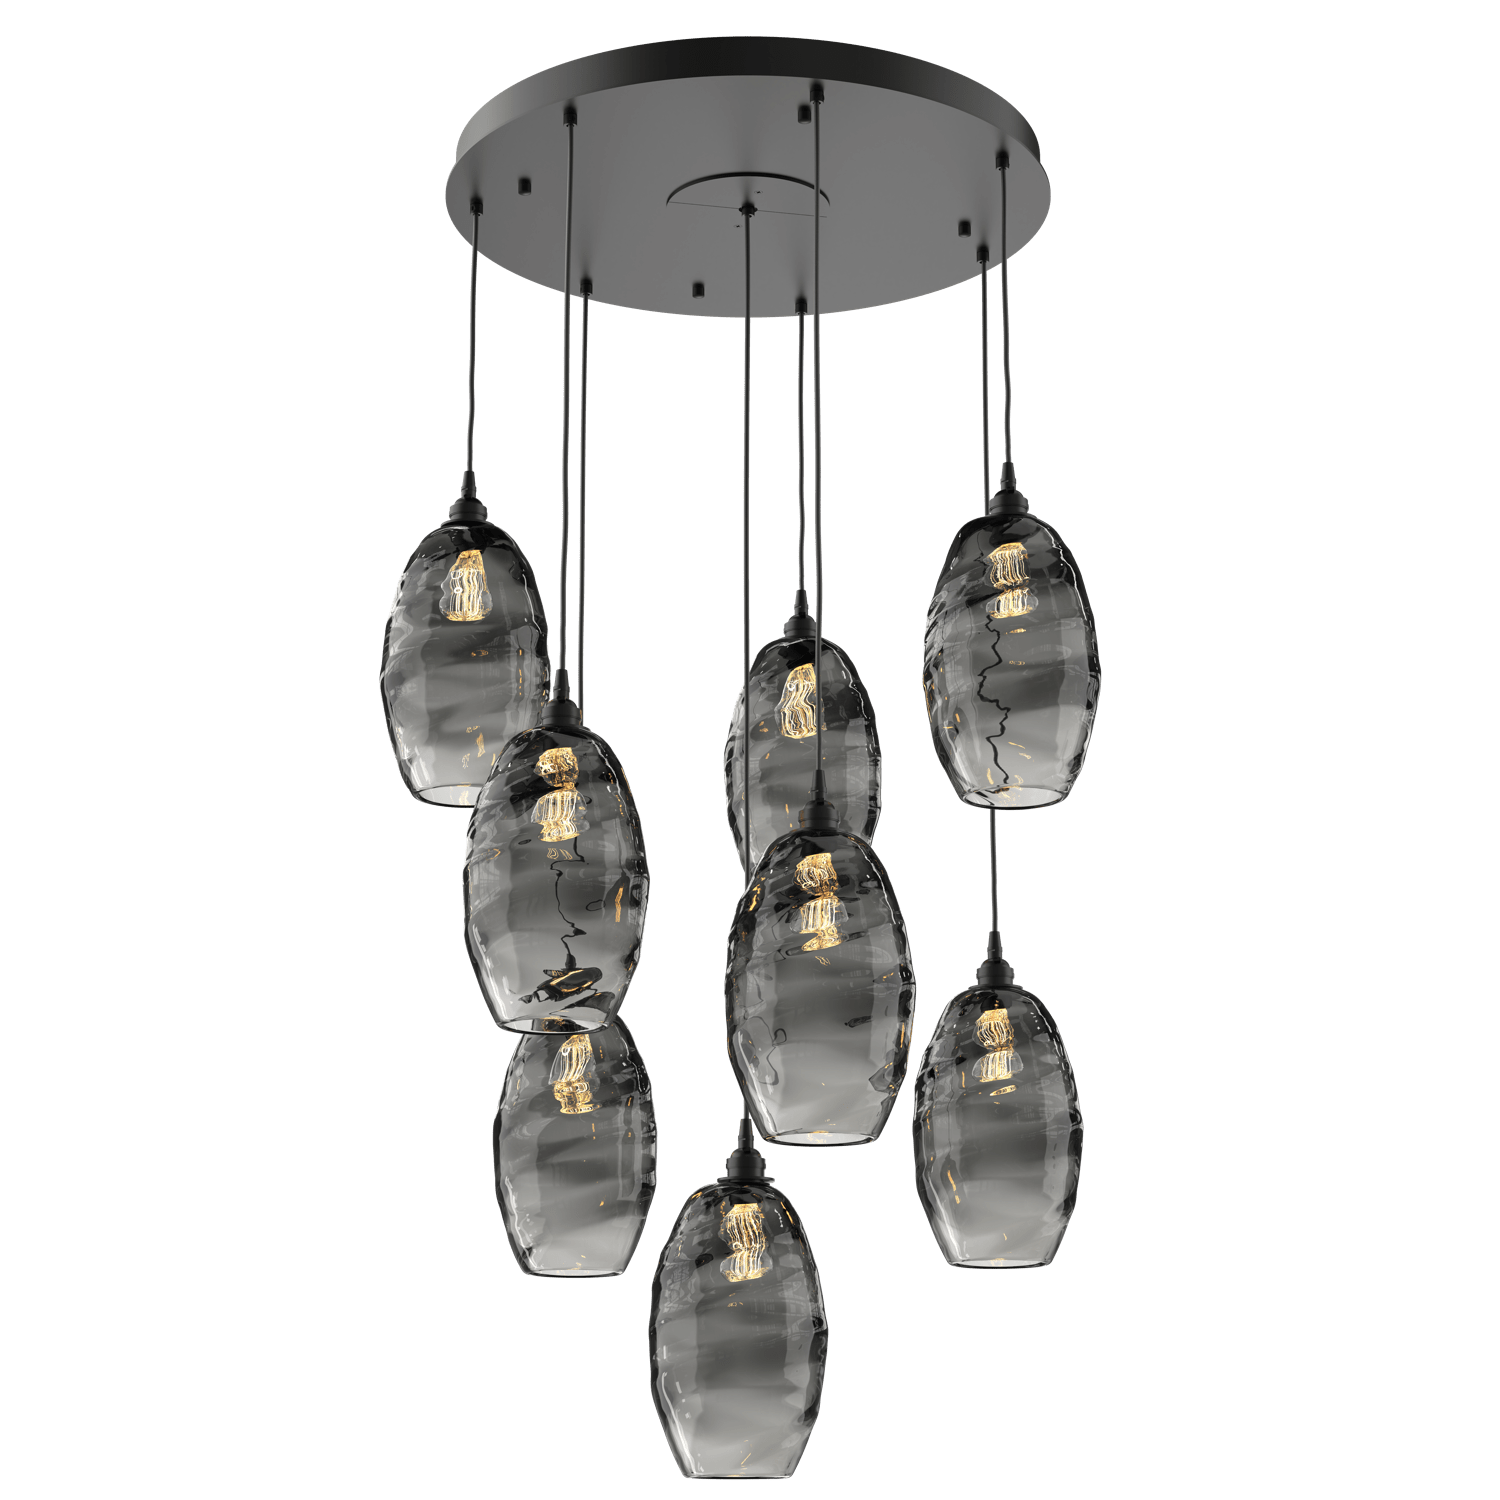 CHB0035-08-MB-OS-Hammerton-Studio-Optic-Blown-Glass-Elisse-8-light-round-pendant-chandelier-with-matte-black-finish-and-optic-smoke-blown-glass-shades-and-incandescent-lamping